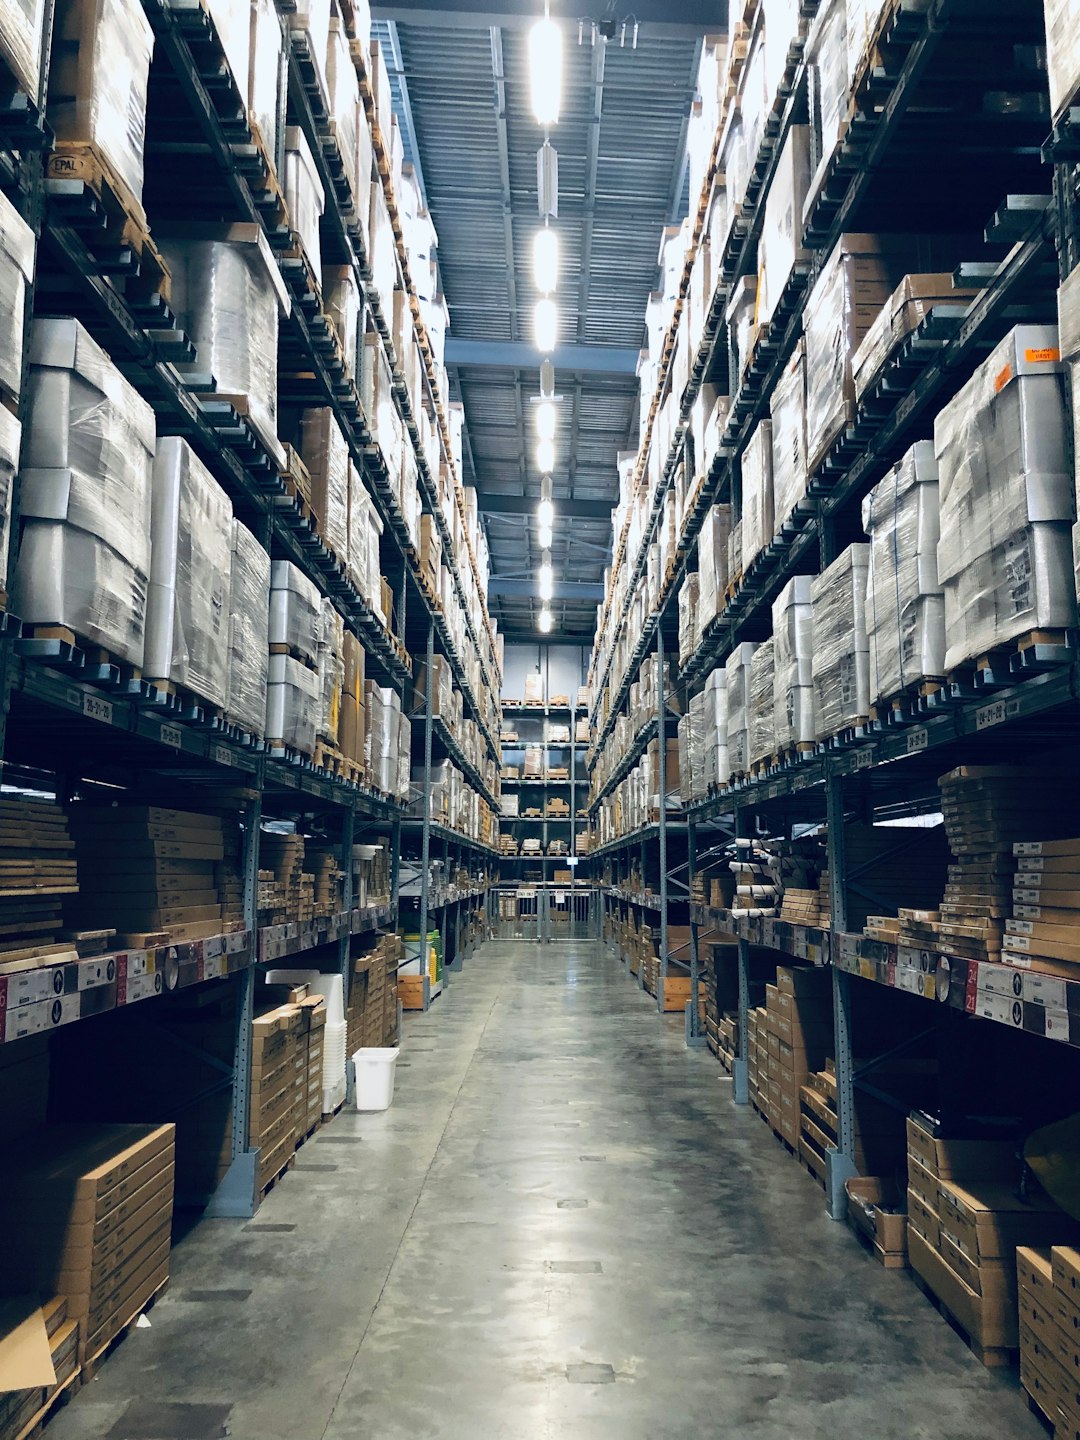 Precisely, the solution we need: Inventory Accuracy